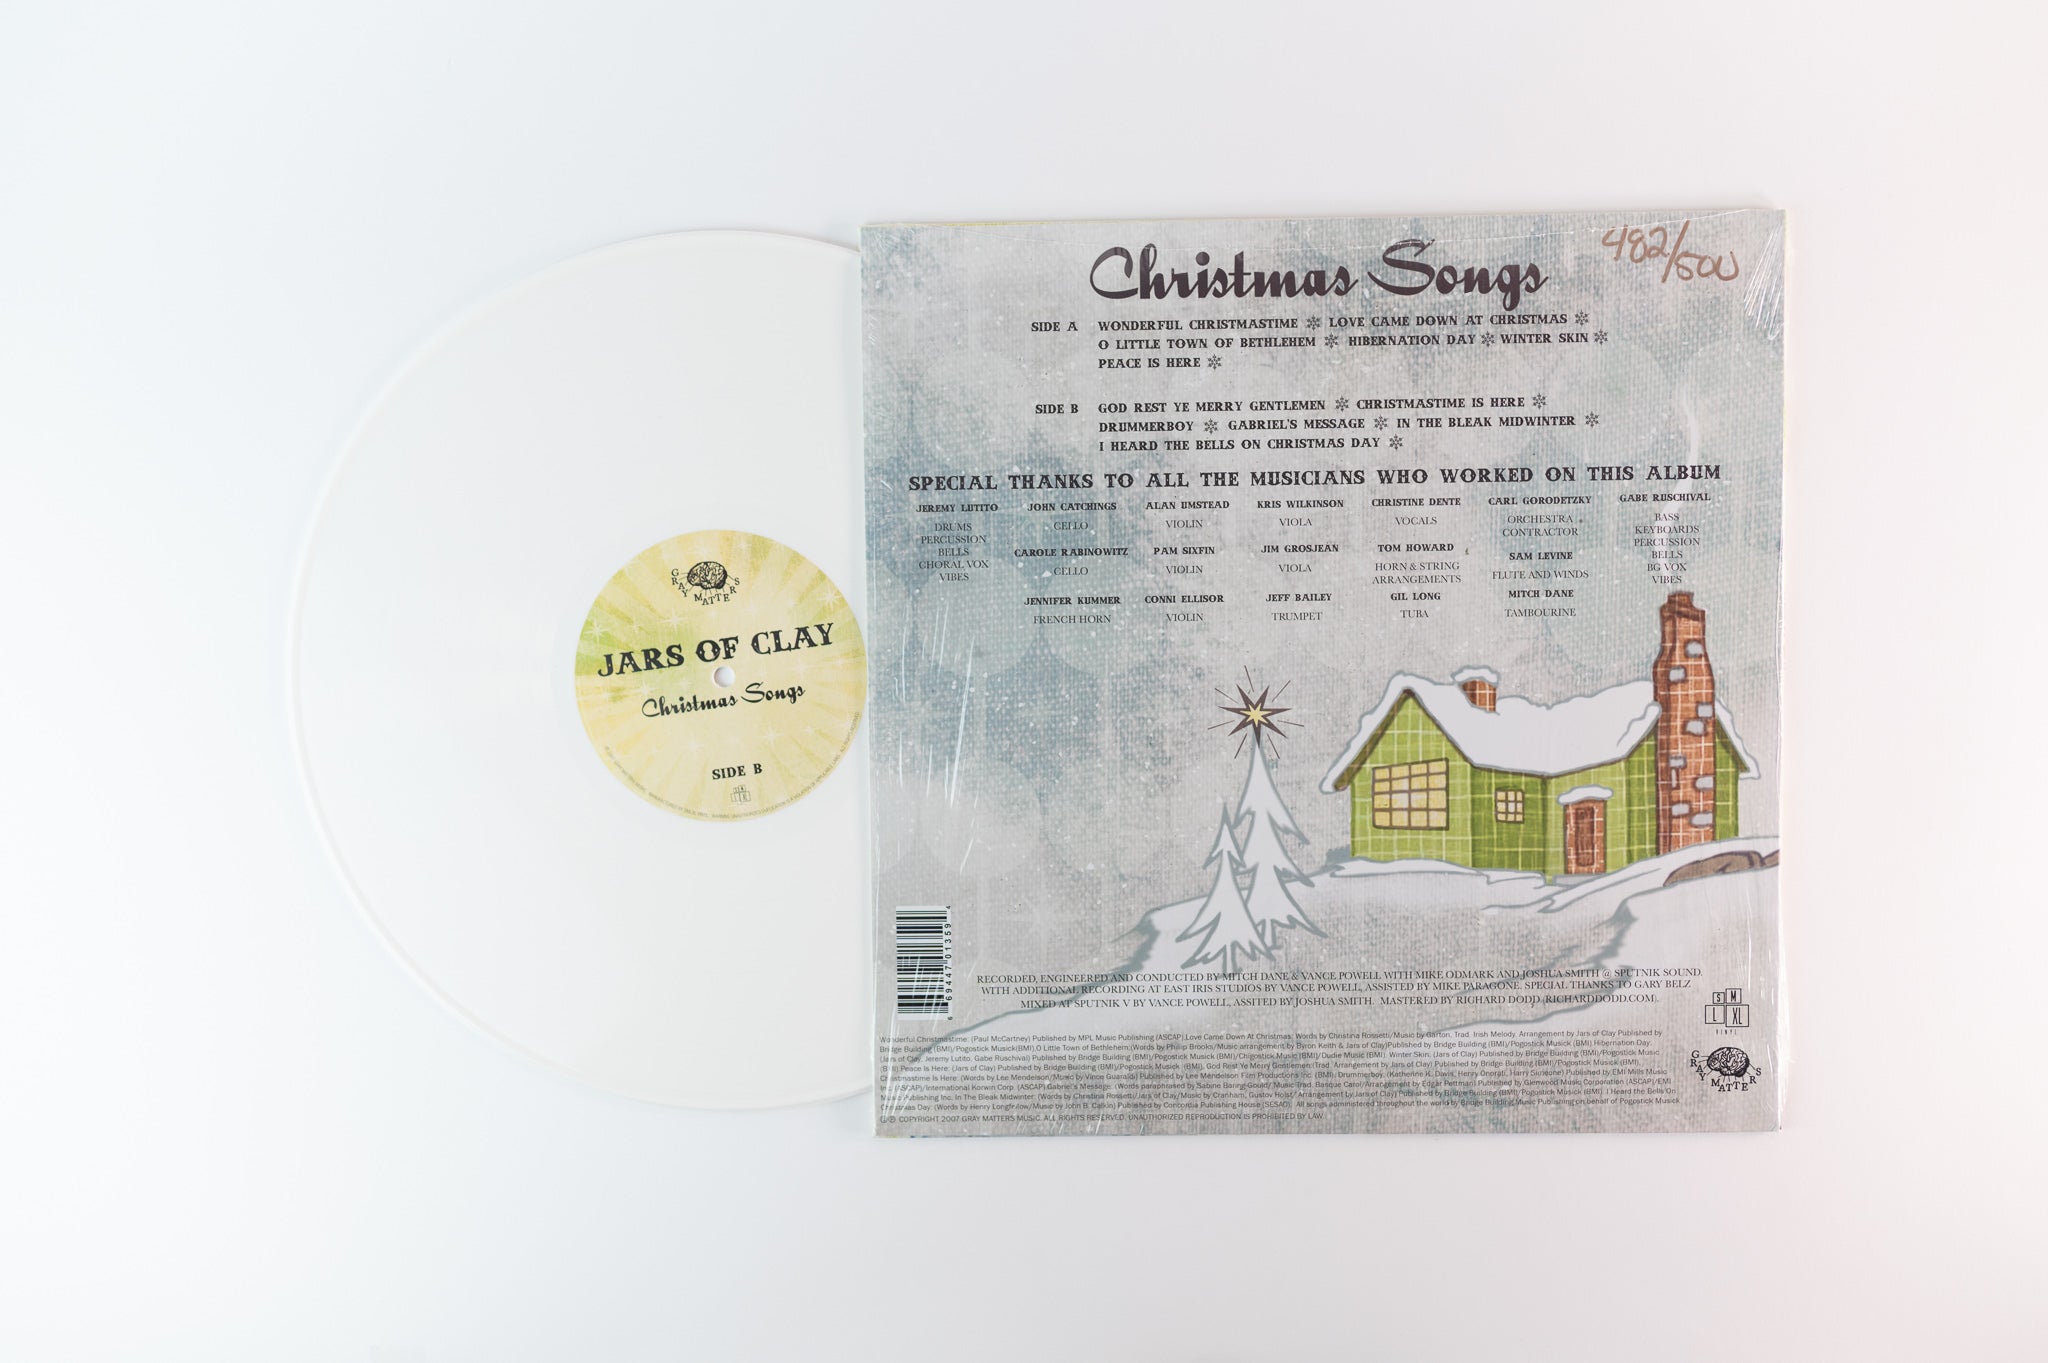 Jars Of Clay - Christmas Songs on Gray Matters Limited White Vinyl